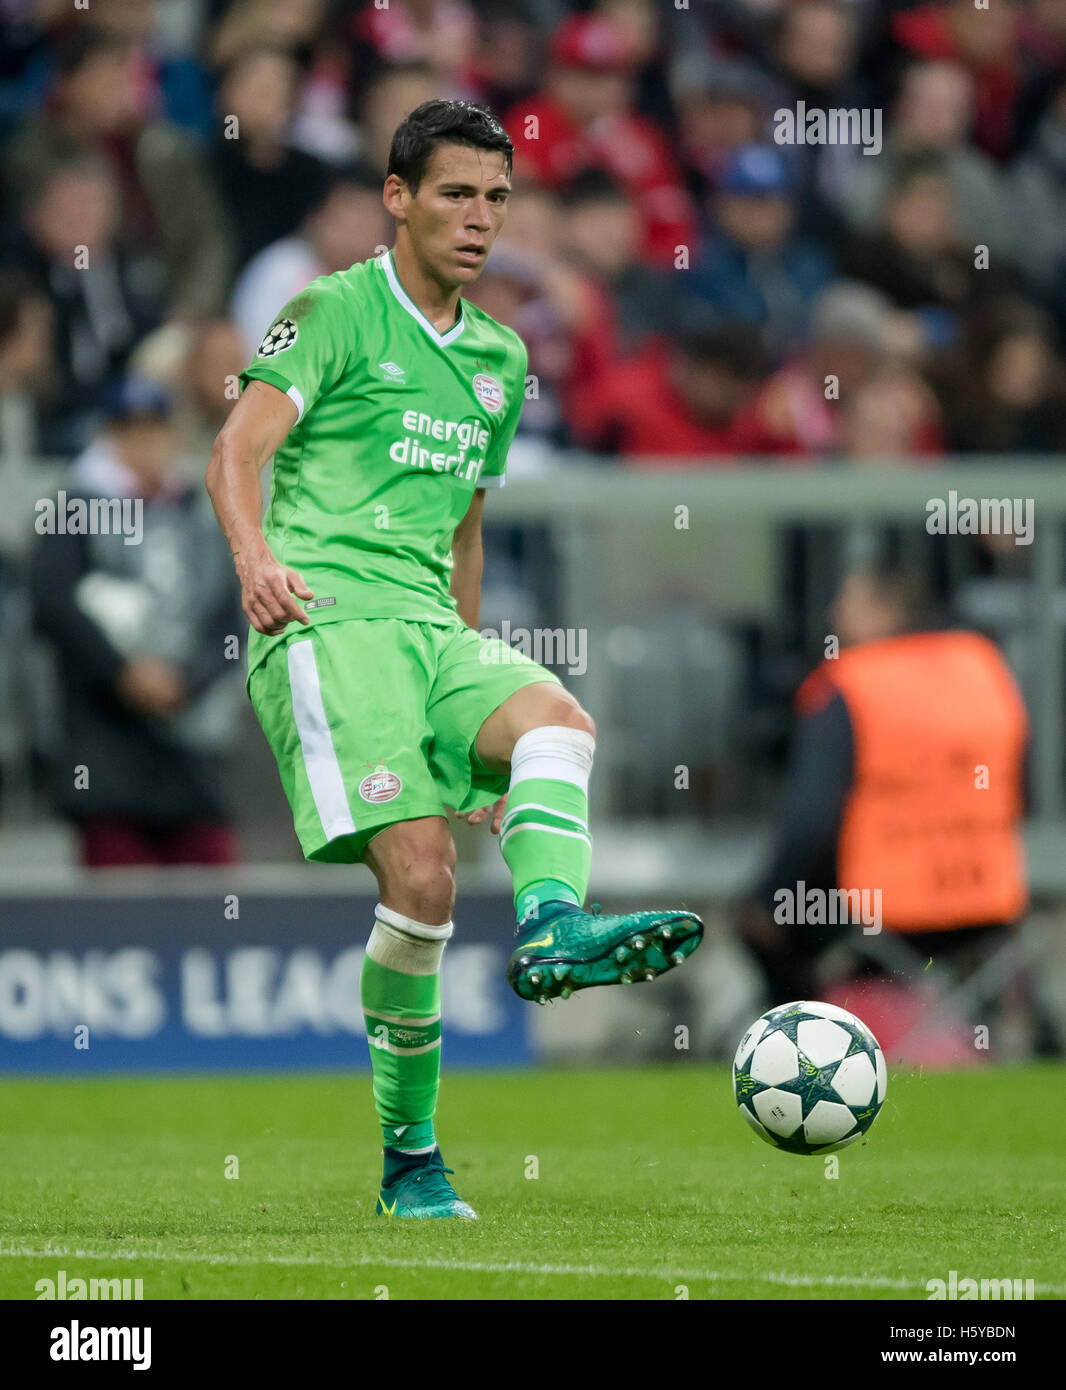 Munich, Germany. 19th Oct, 2016. Eindhoven's Hector Moreno in action during the UEFA Champions League soccer match between FC Bayern Munich and PSV Eindhoven at the Allianz Arena in Munich, Germany, 19 October 2016. PHOTO: THOMAS EISENHUTH/dpa - NO WIRE SERVICE - © dpa/Alamy Live News Stock Photo